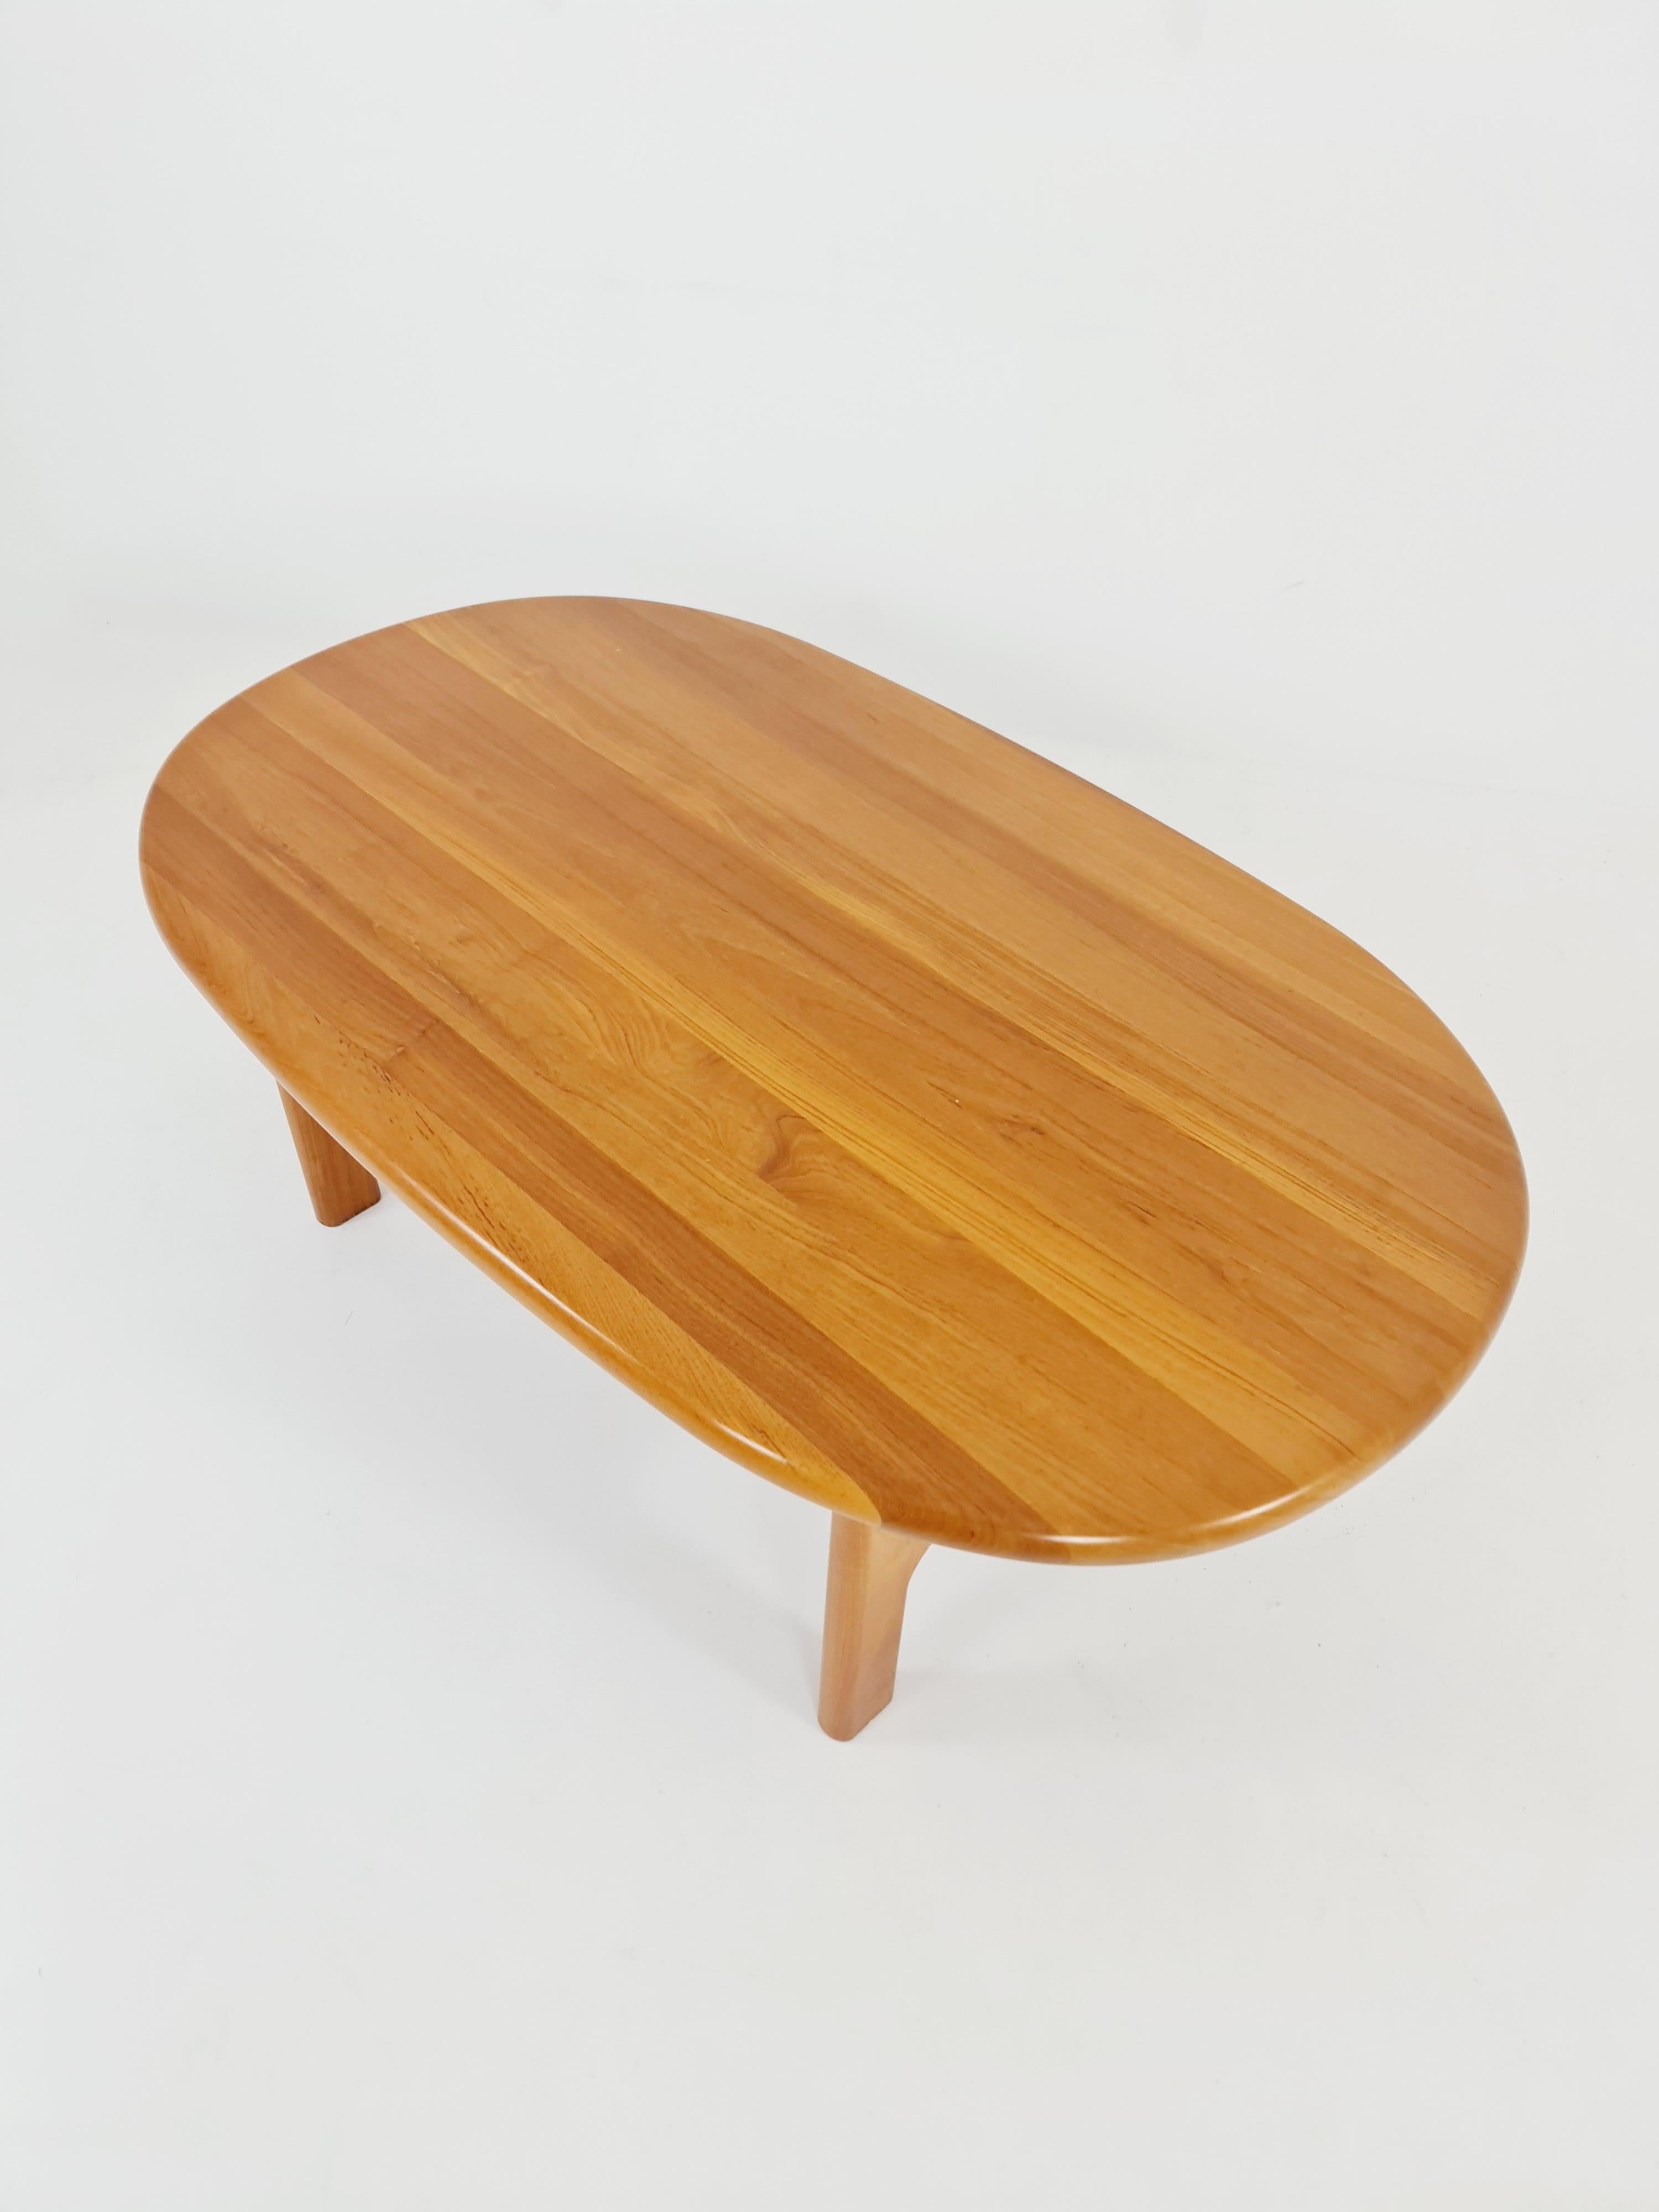 Danish Teak solid coffee table/ side table By Niels Bach for Randers Möbel, 1960 For Sale 1